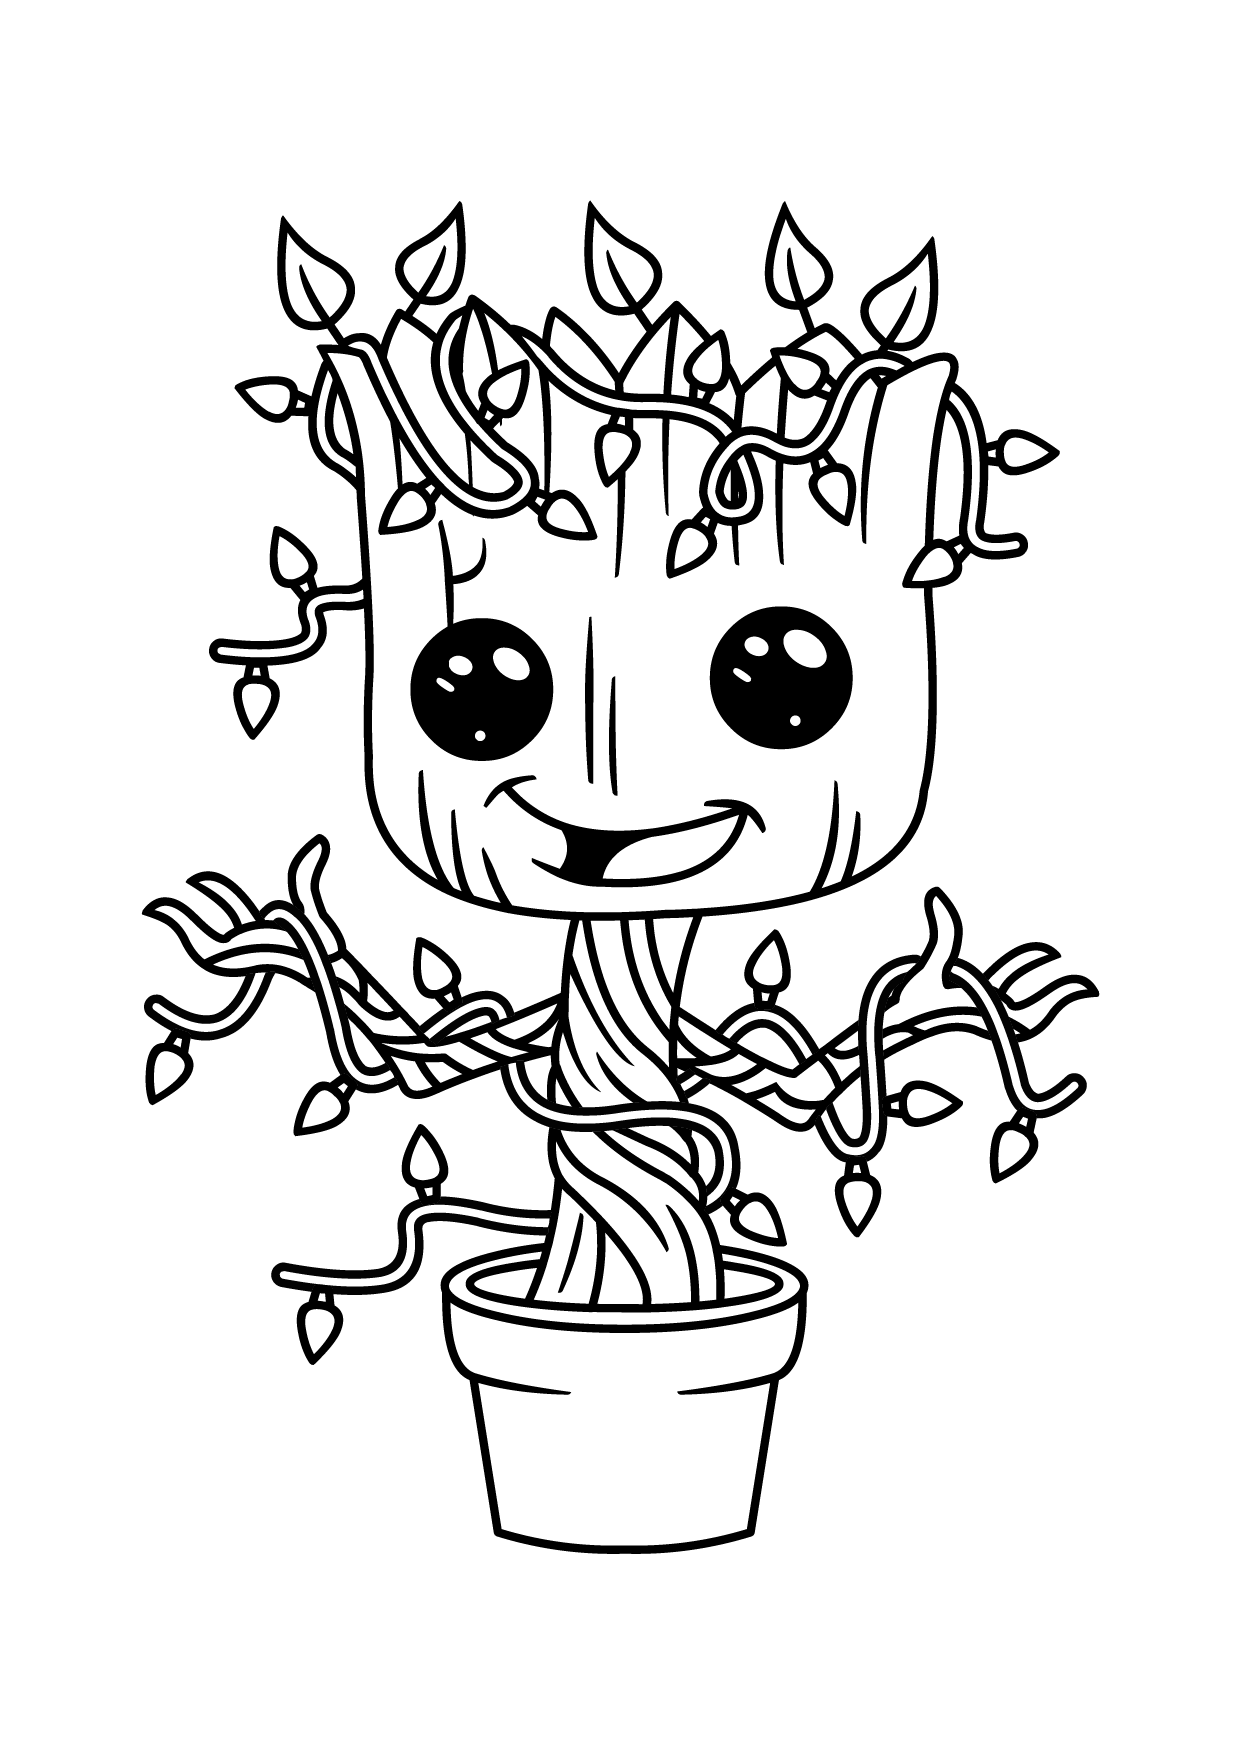 Groot Coloring Pages - Coloring Home